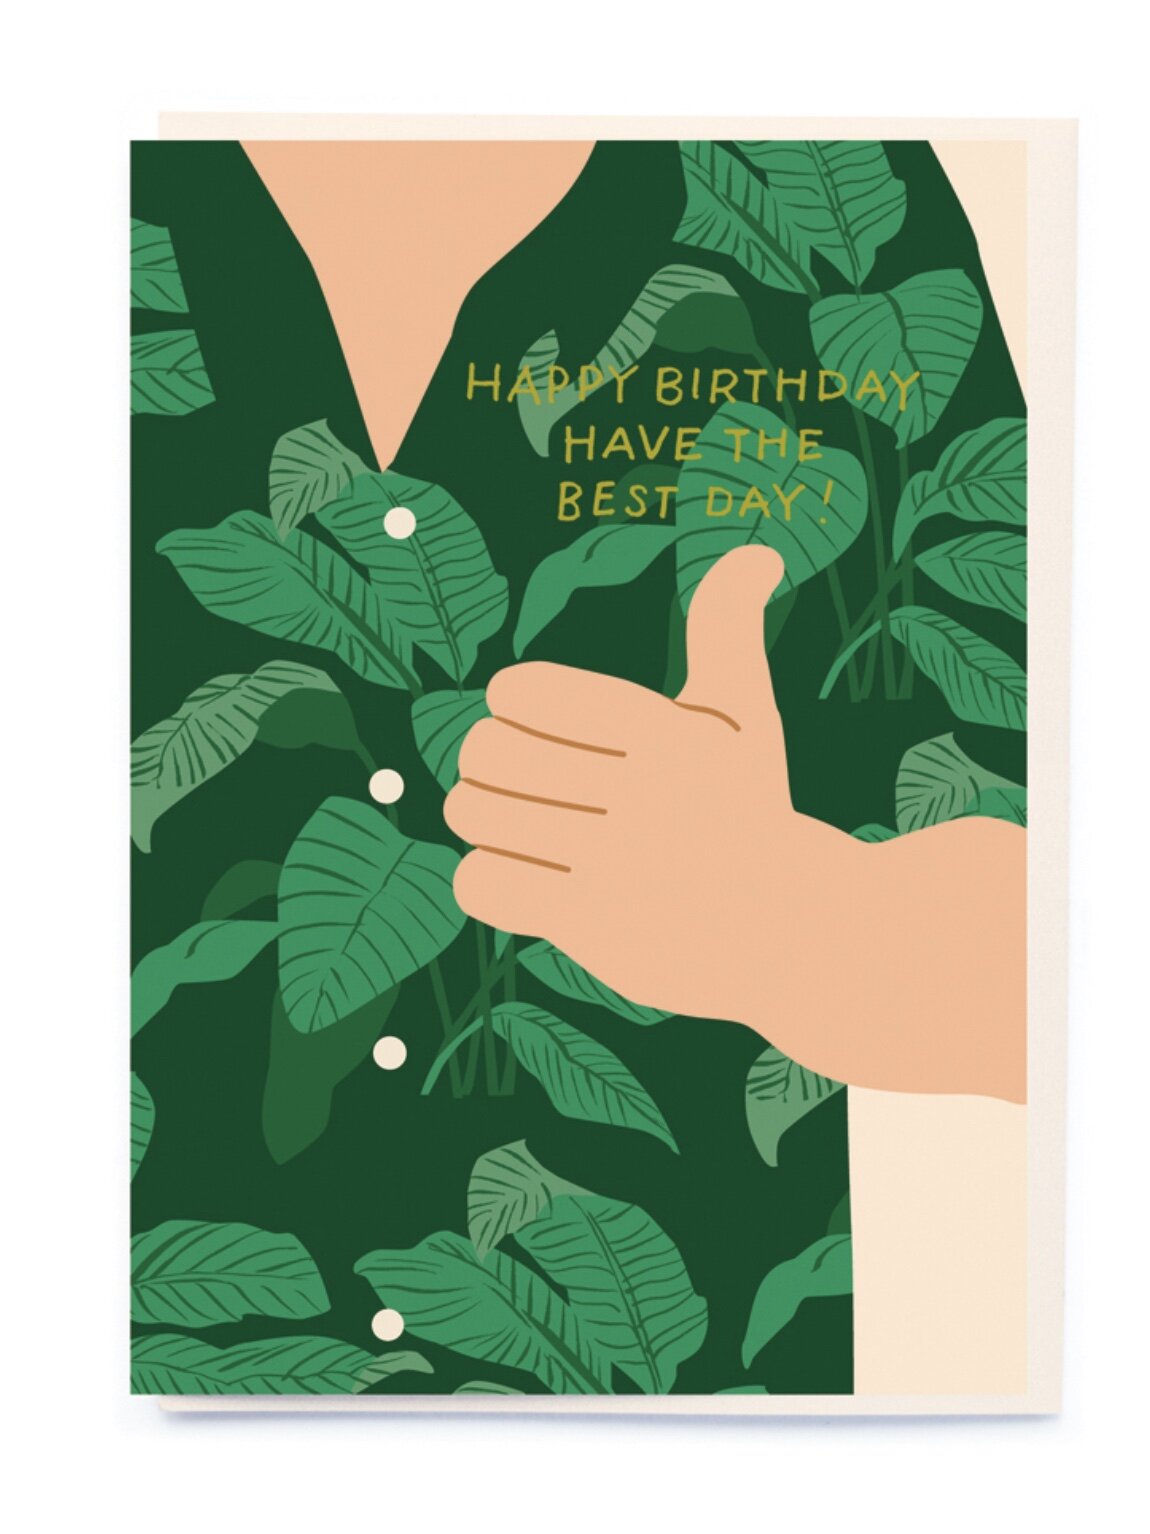 HAPPY BIRTHDAY, HAVE THE BEST DAY EVER | CARD BY NOI